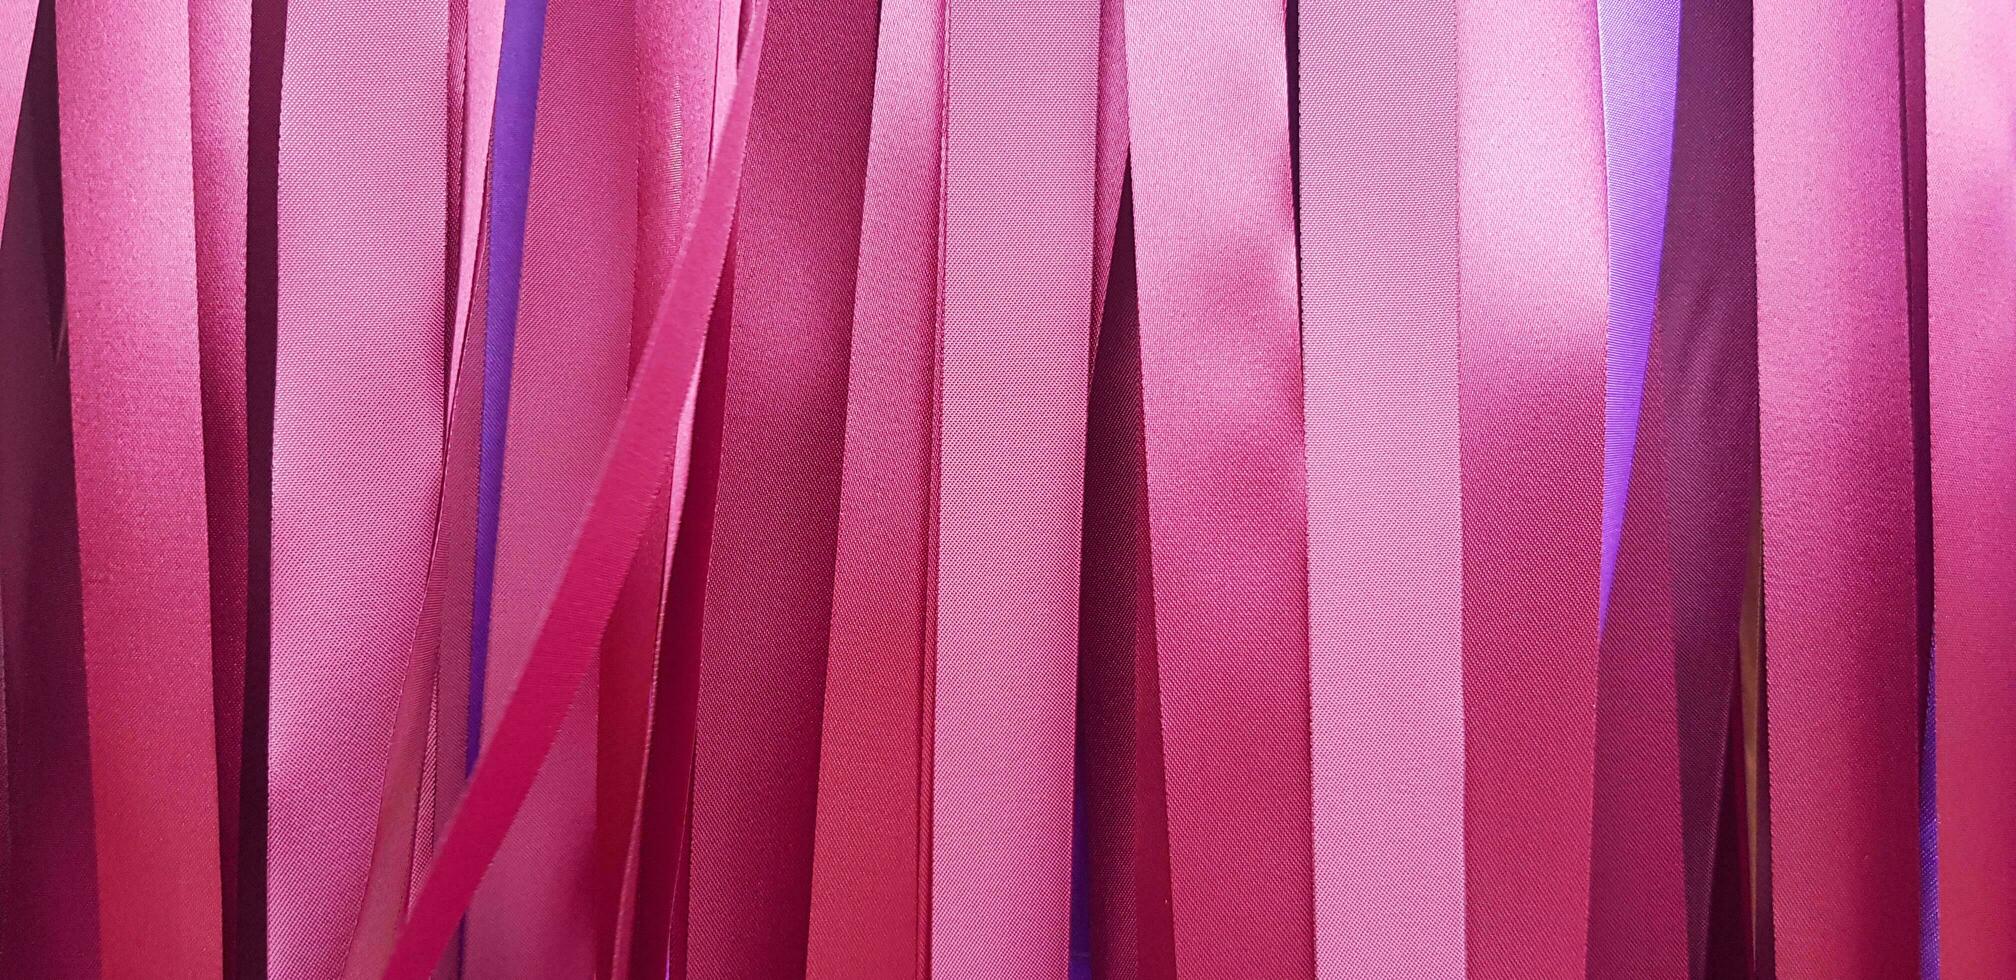 Purple or violet, pink or red ribbon background or wall. Pastel and colorful paper or fabric decoration in party, festival, wedding, New year and celebration concept. photo